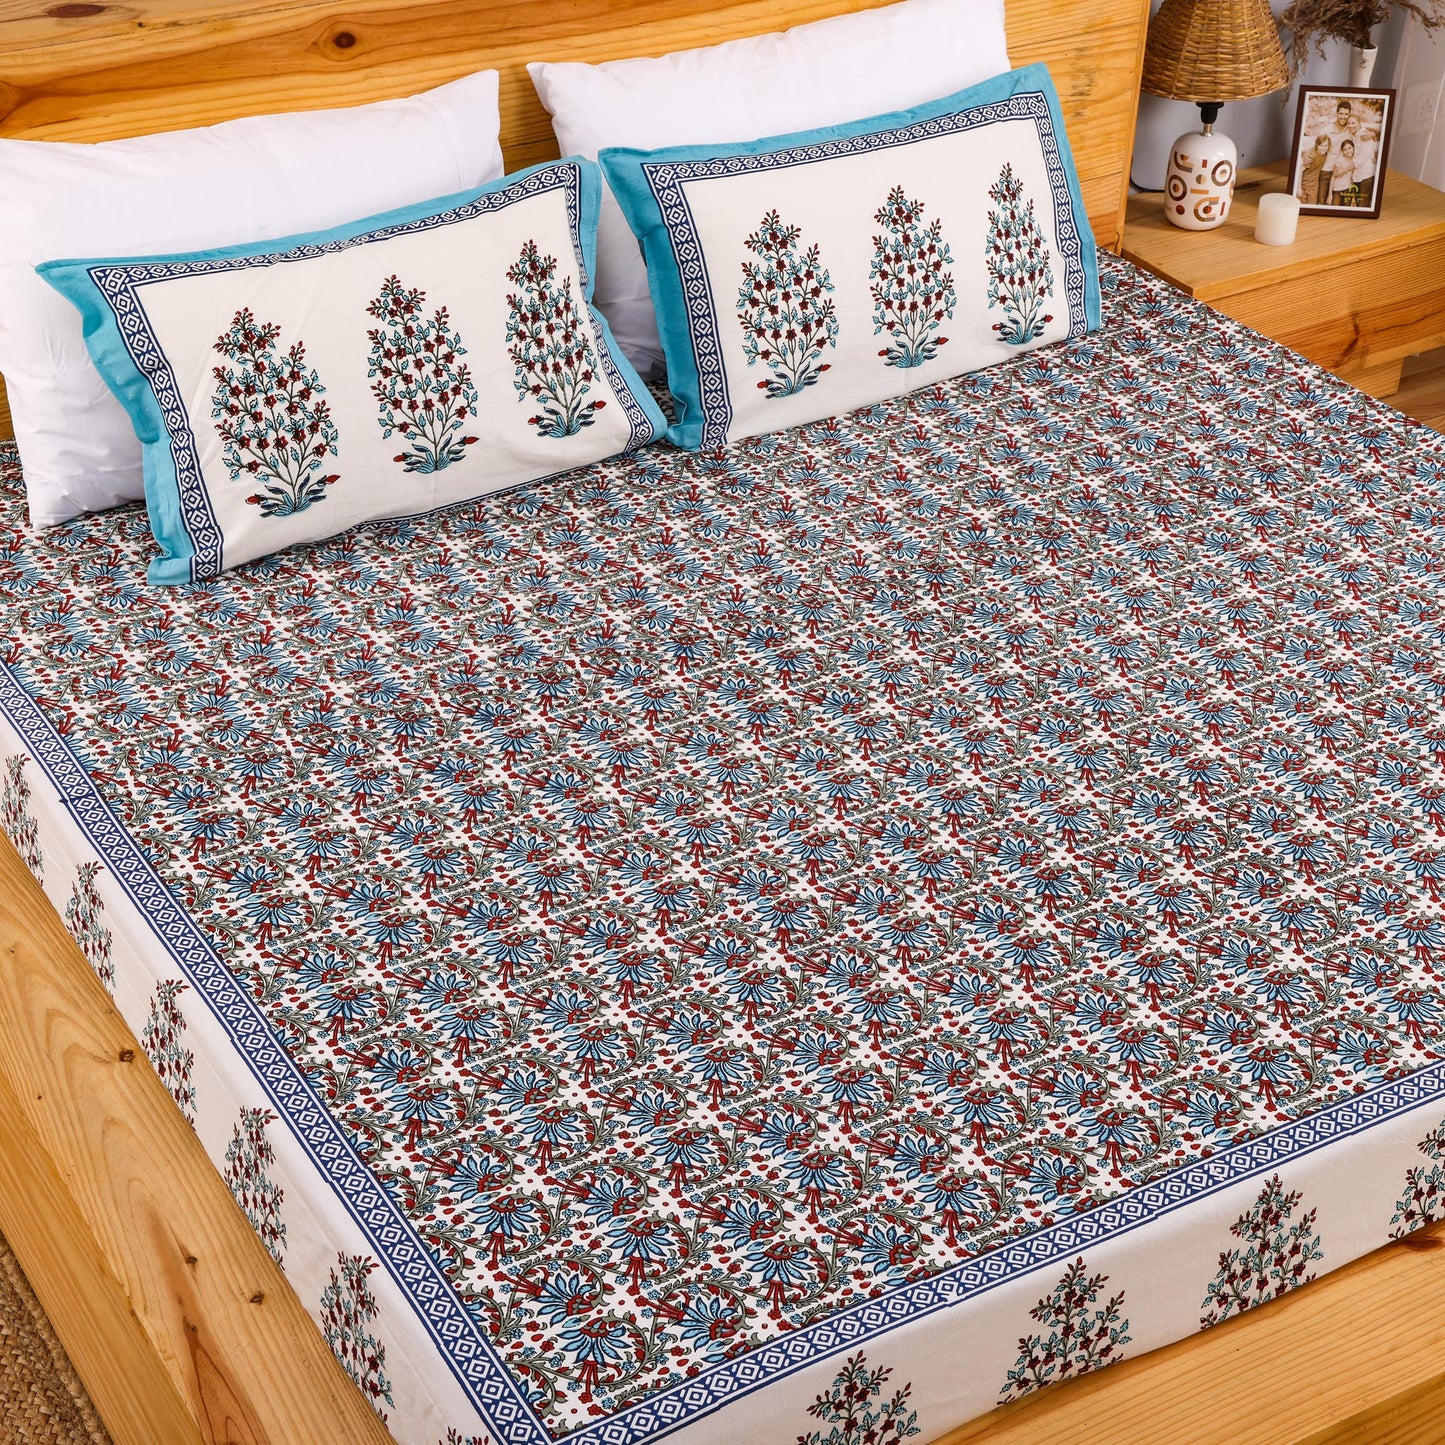 Pure Cotton Block Print Jaipuri Bedsheet - Super King Size 108*108 inches - Blue Floral Jaal